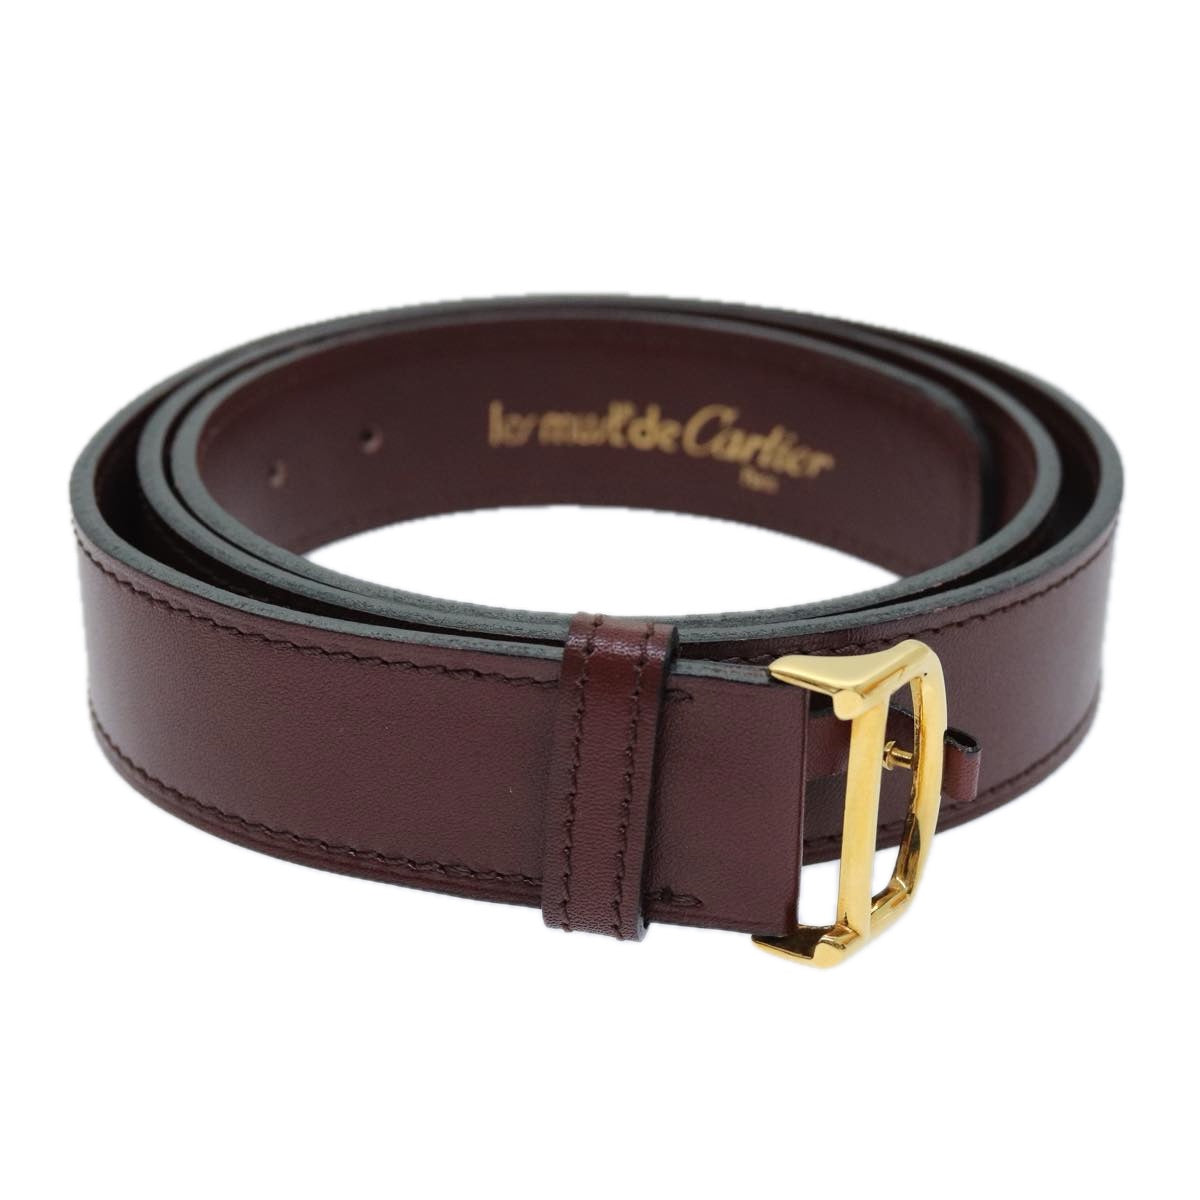 CARTIER Belt Leather 39.8"" Red Auth am6240